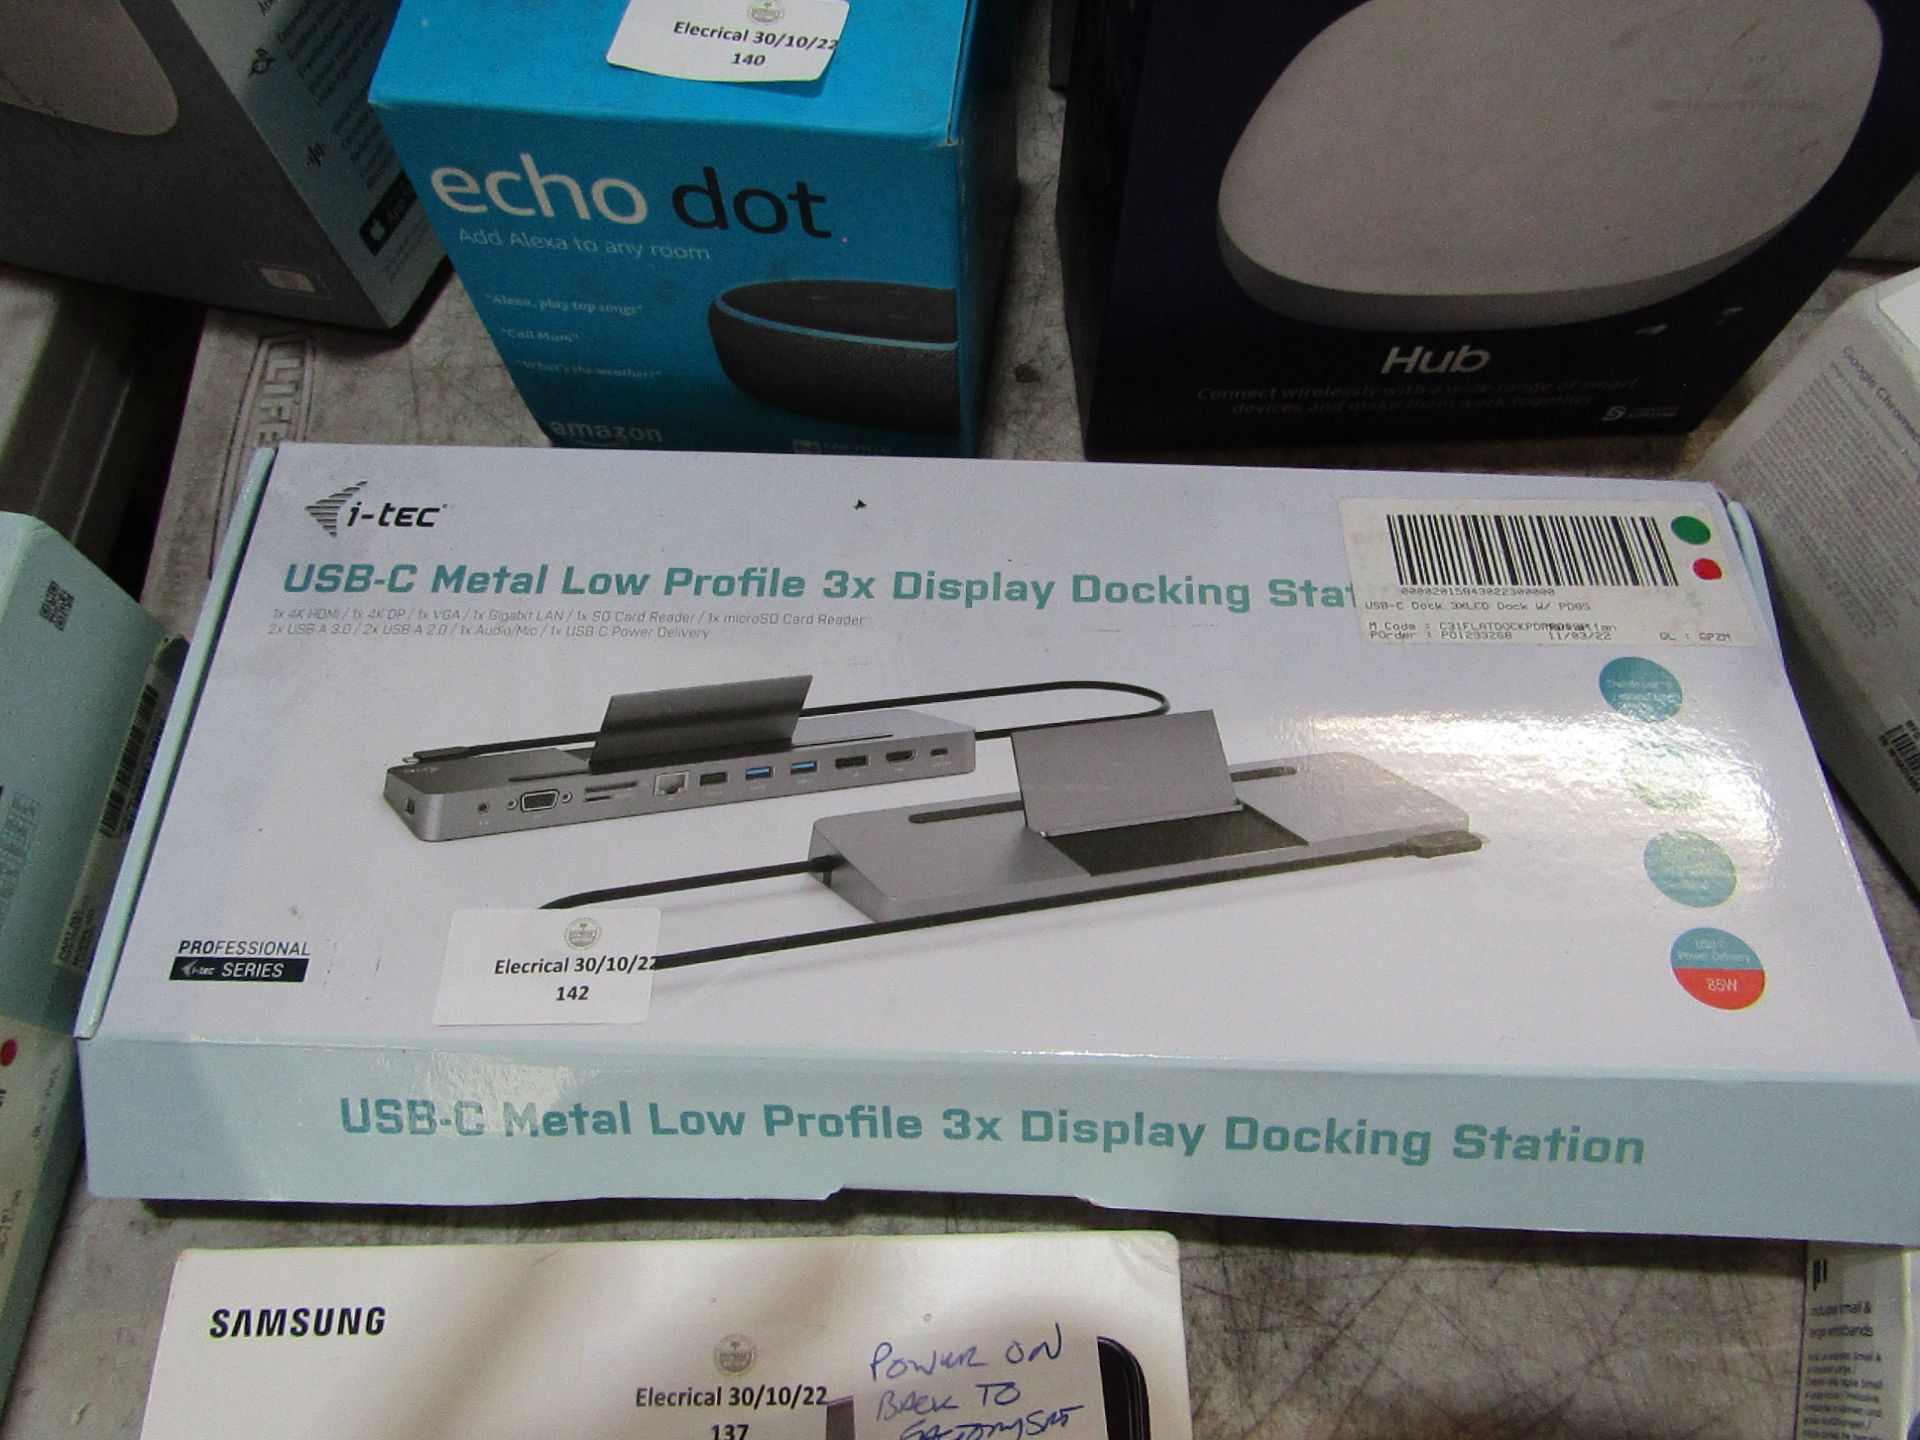 i-tec USB-C Metal Low Profile 3x Display Docking Station boxed unchecked